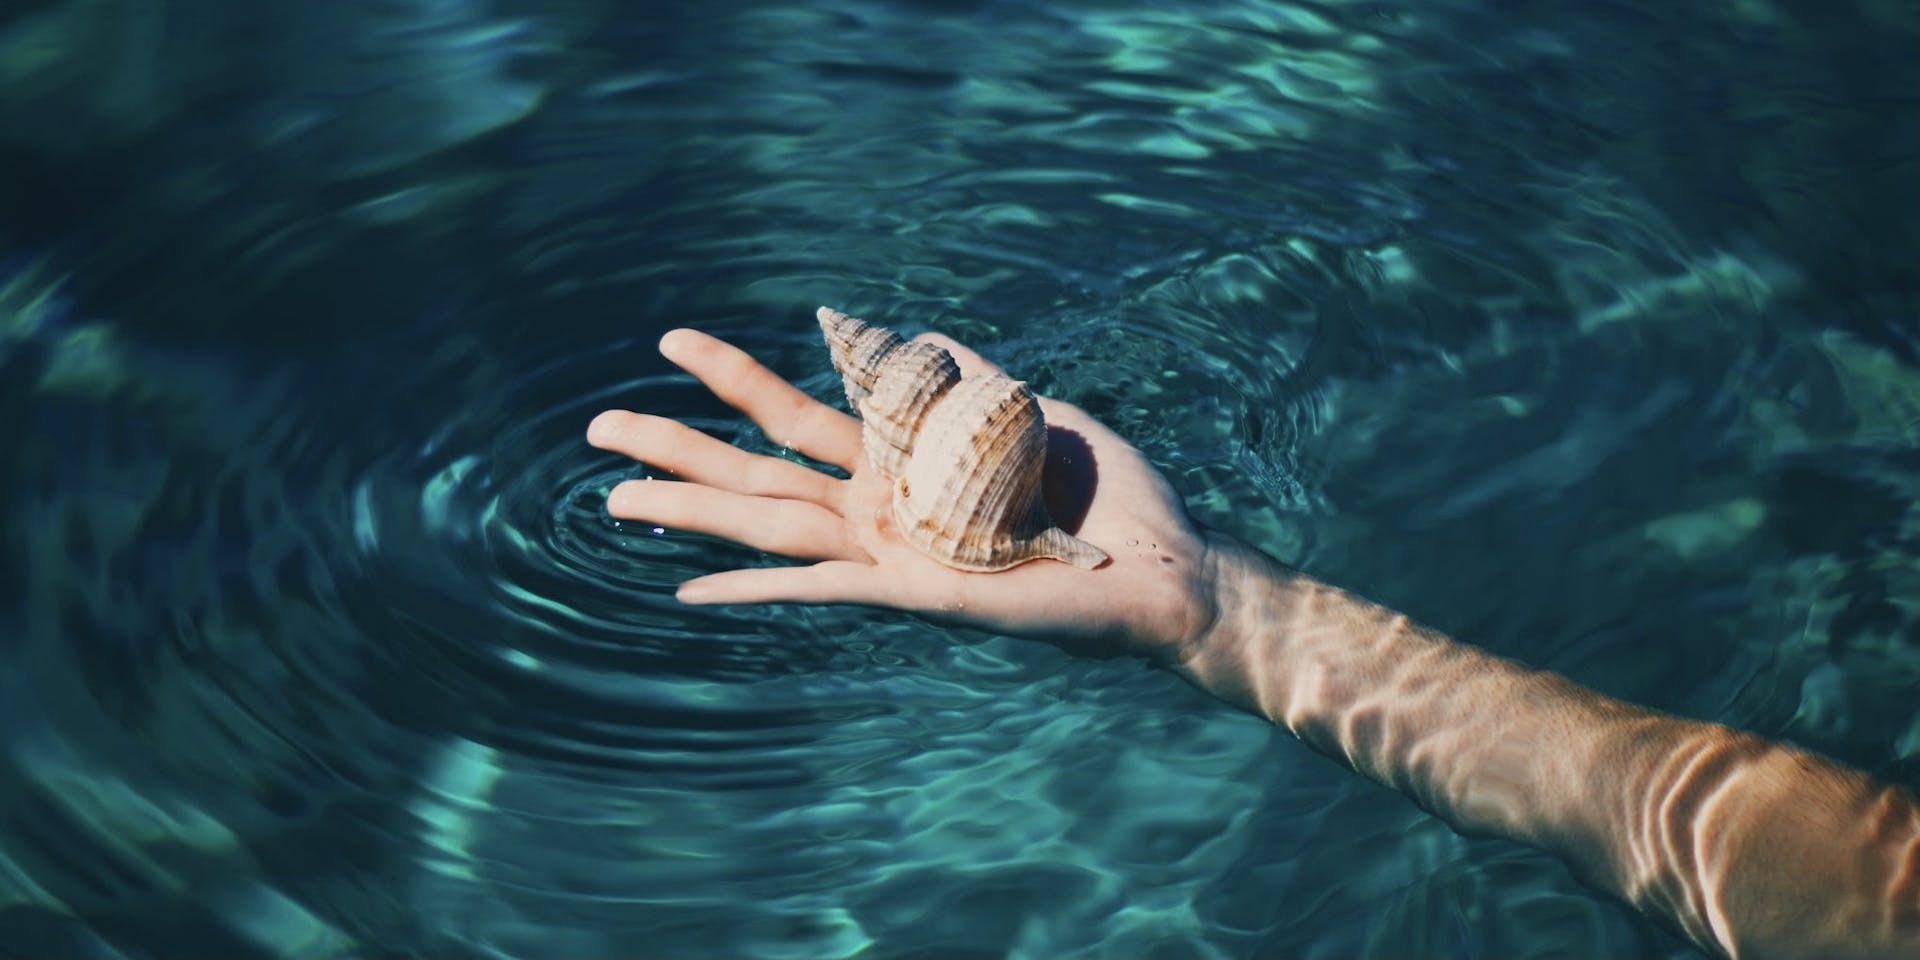 A white person's arm reaches out into a body of turquoise blue water, holding a sea shell.